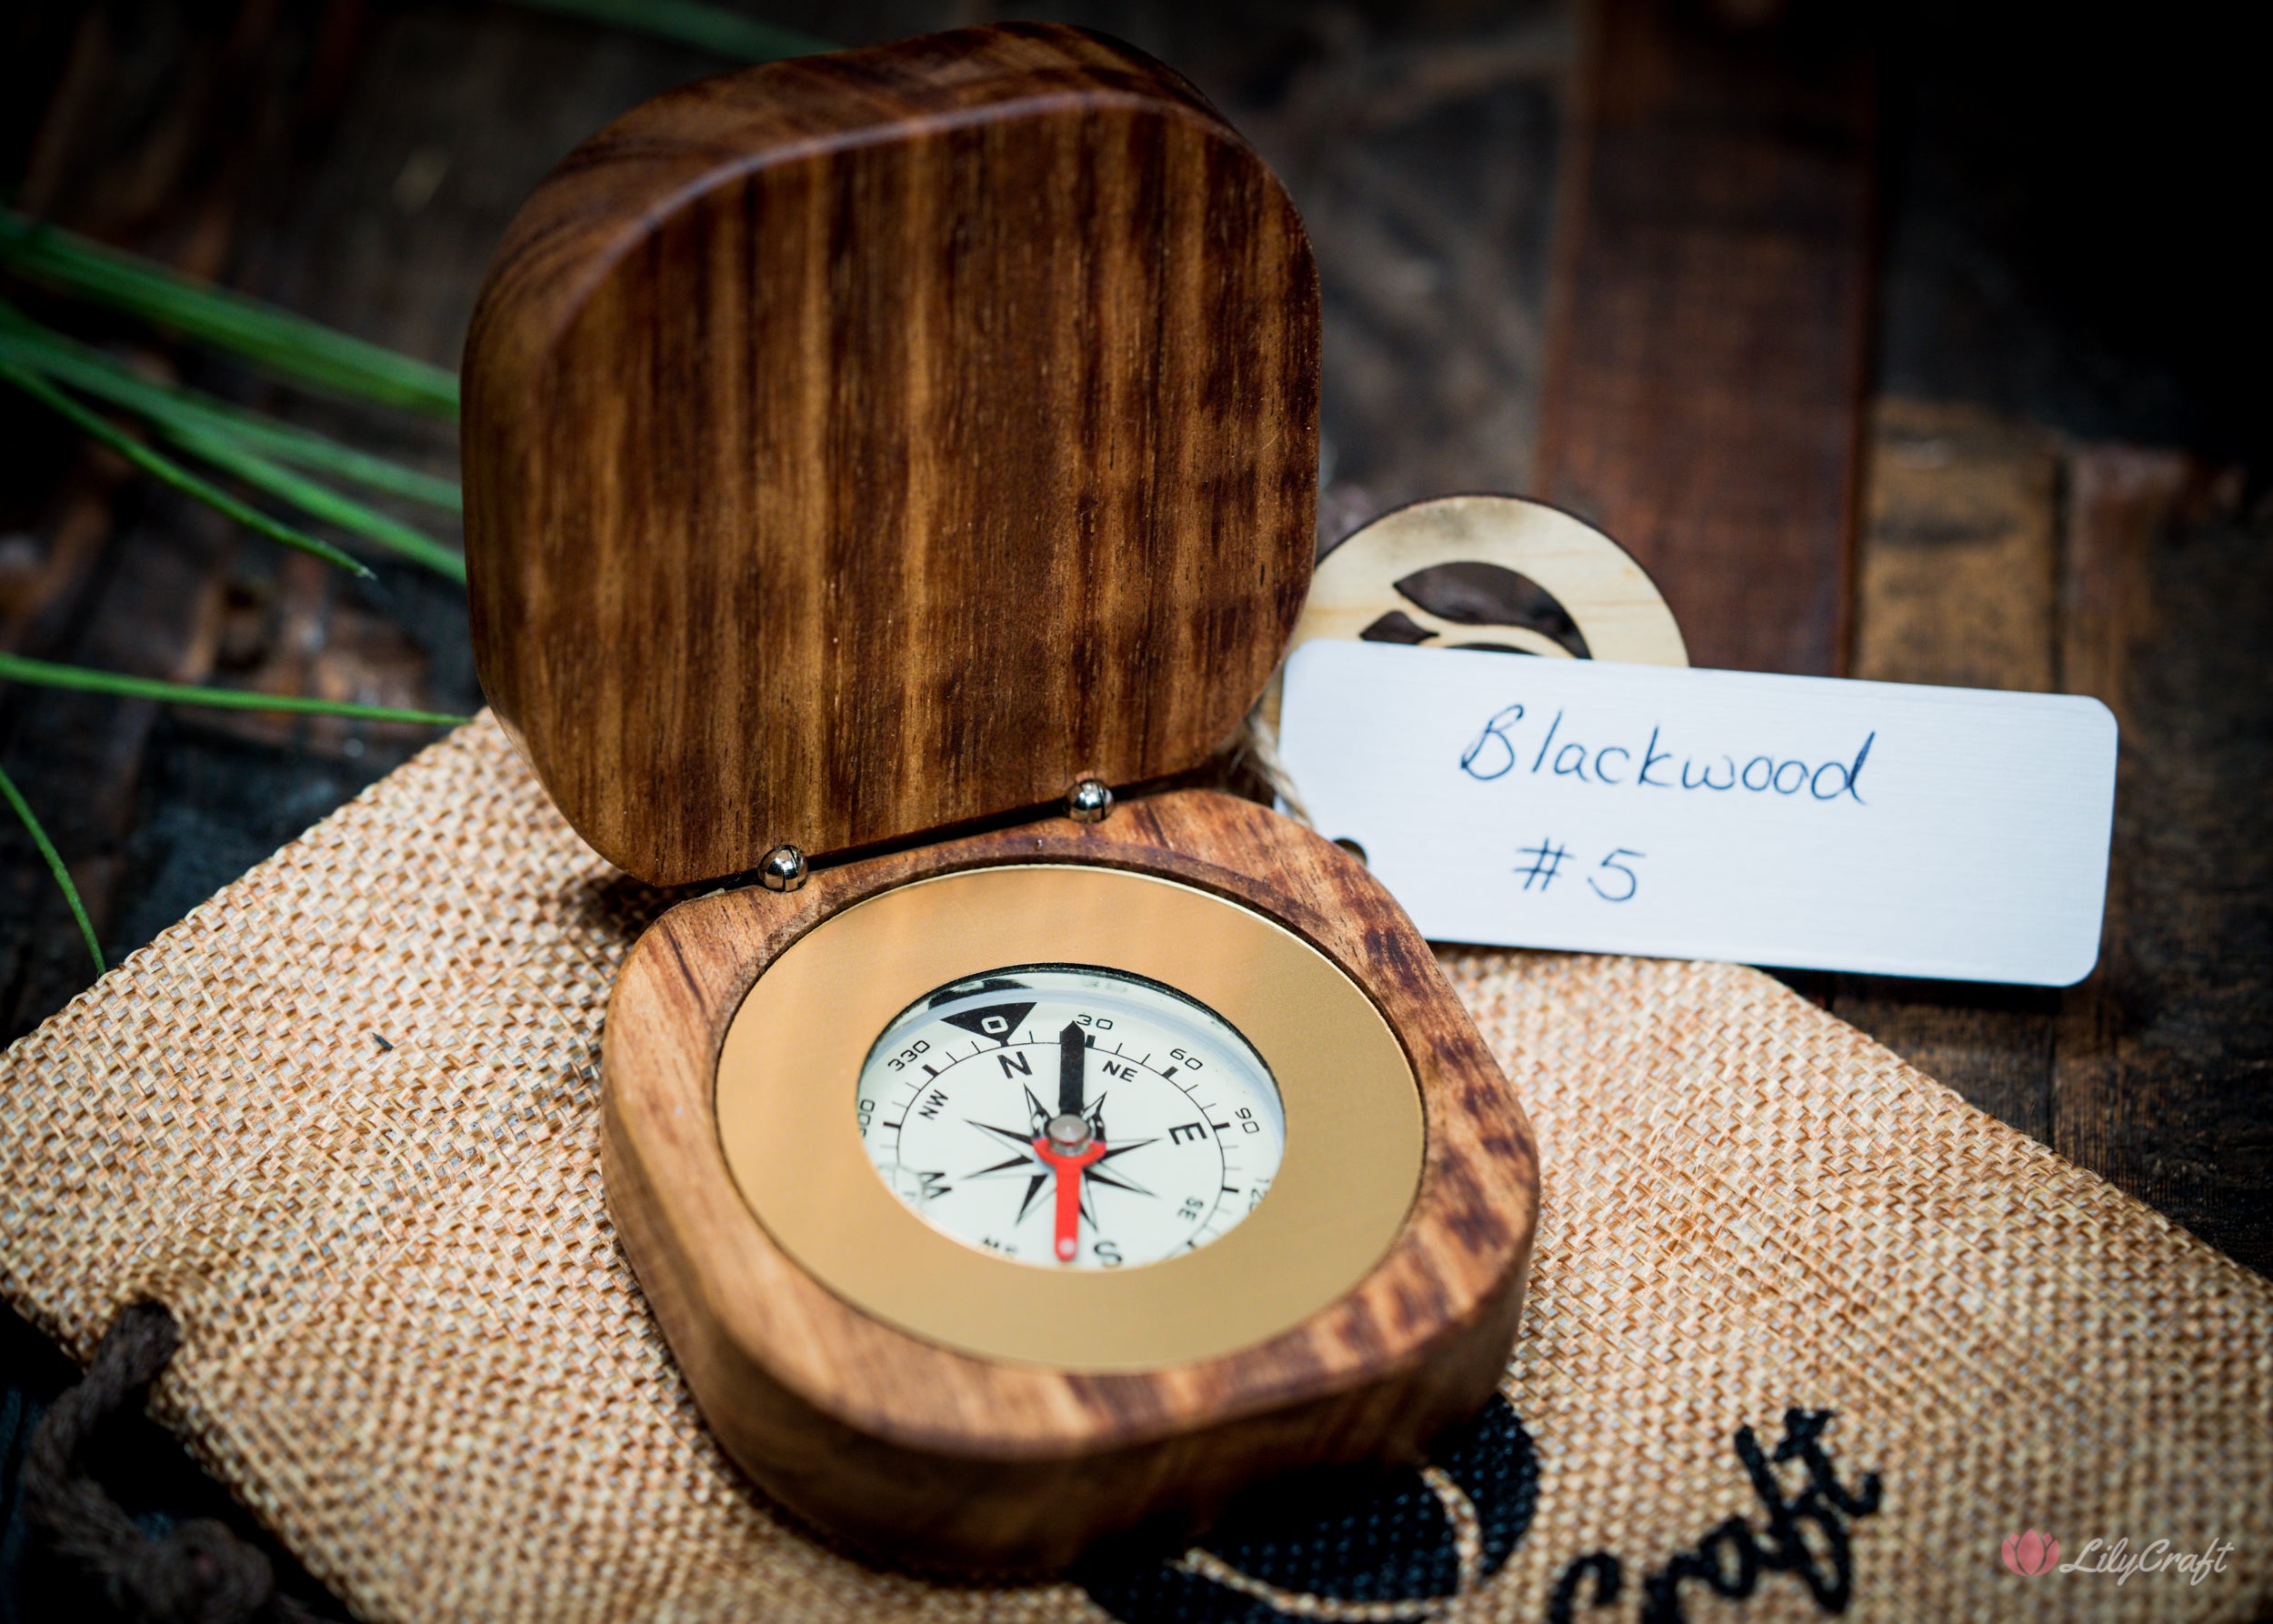 Rare wooden compass presented in a gift-worthy packaging.